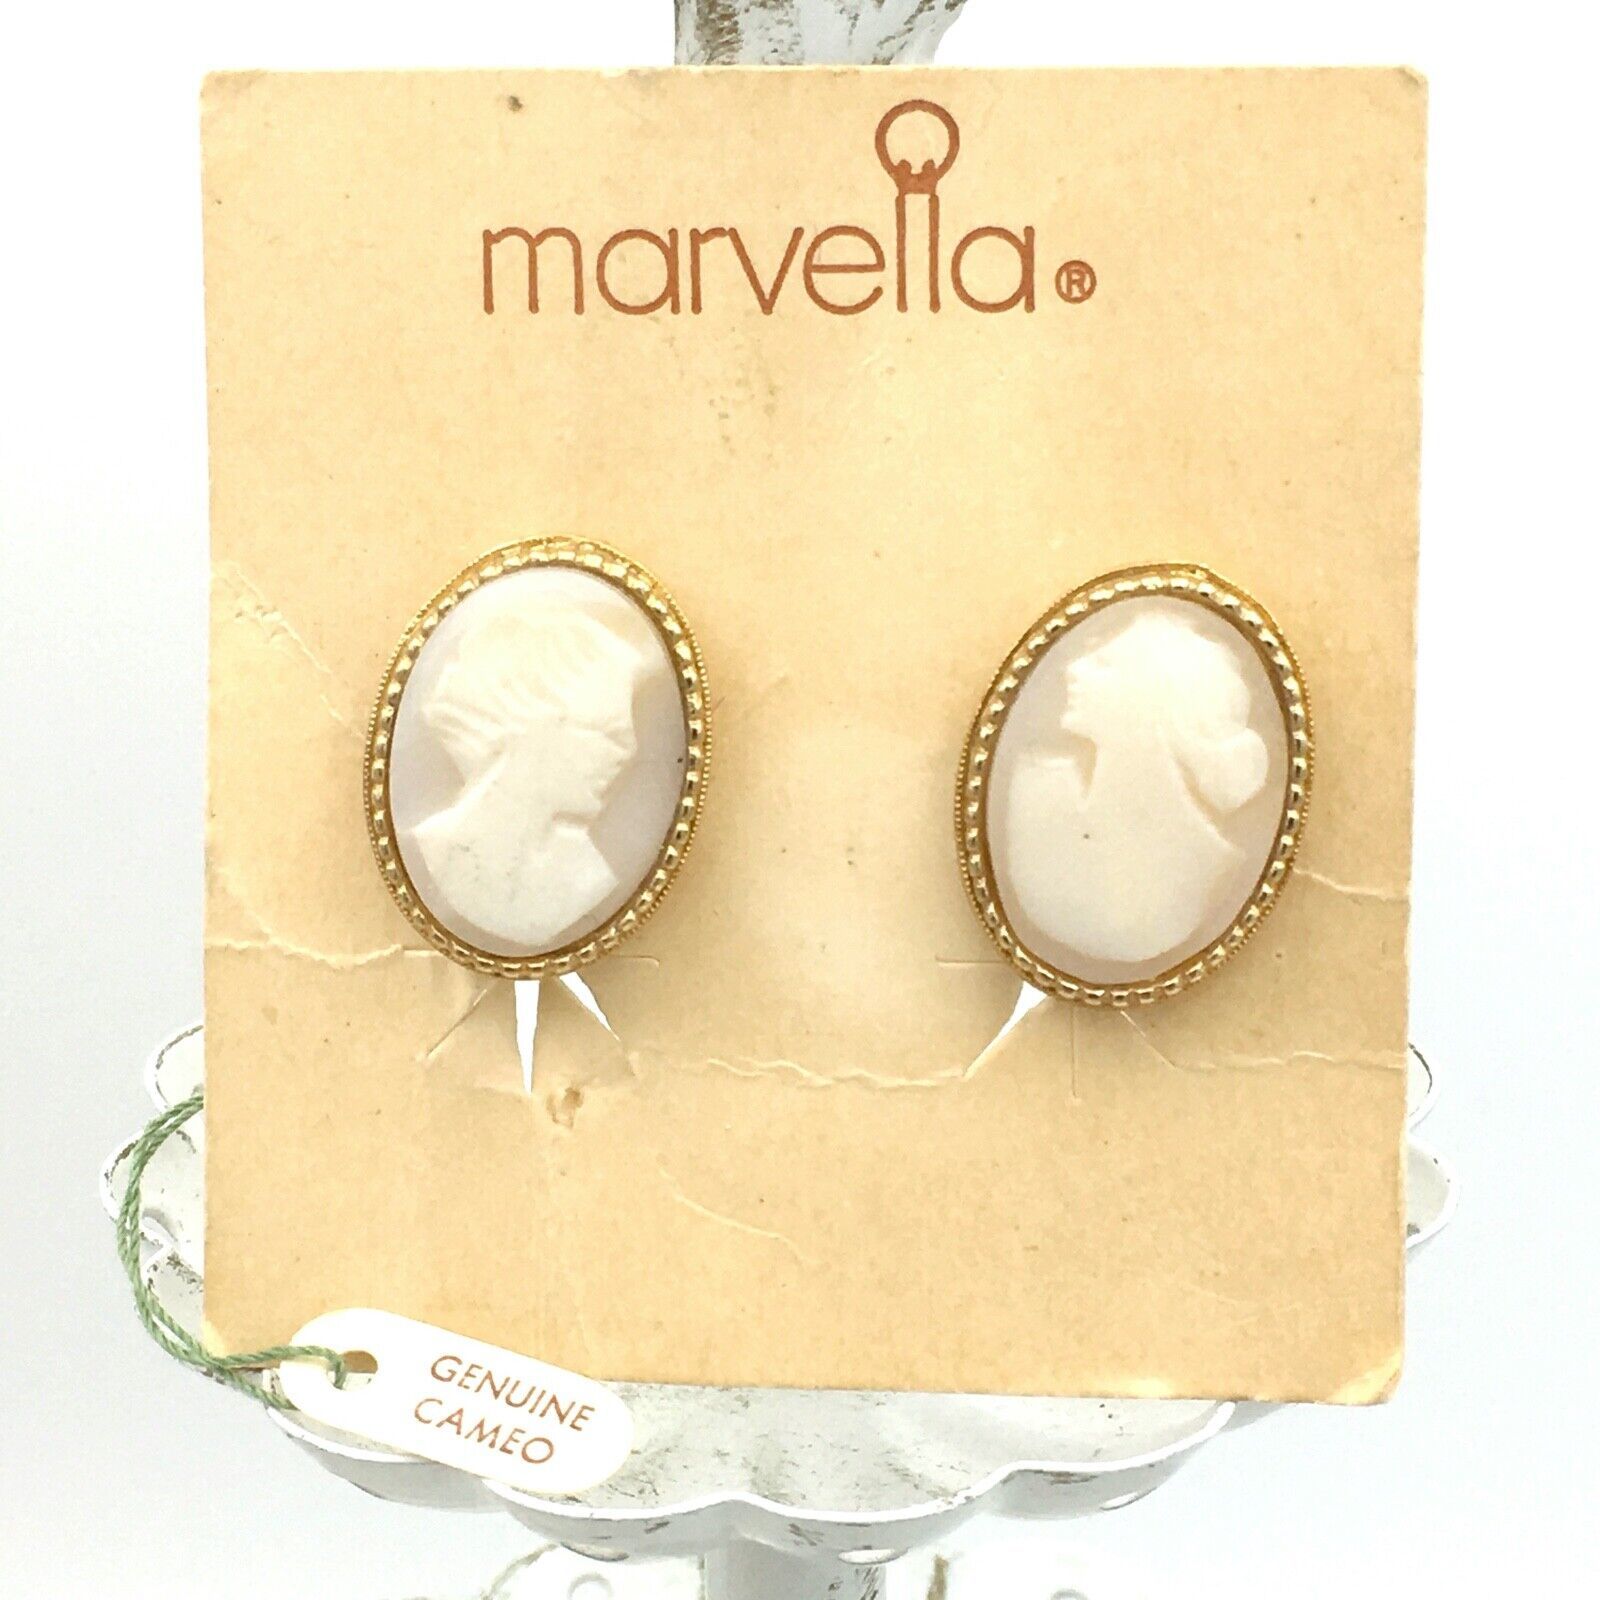 Primary image for MARVELLA vintage genuine cameo clip-on earrings - NEW carved shell gold-tone